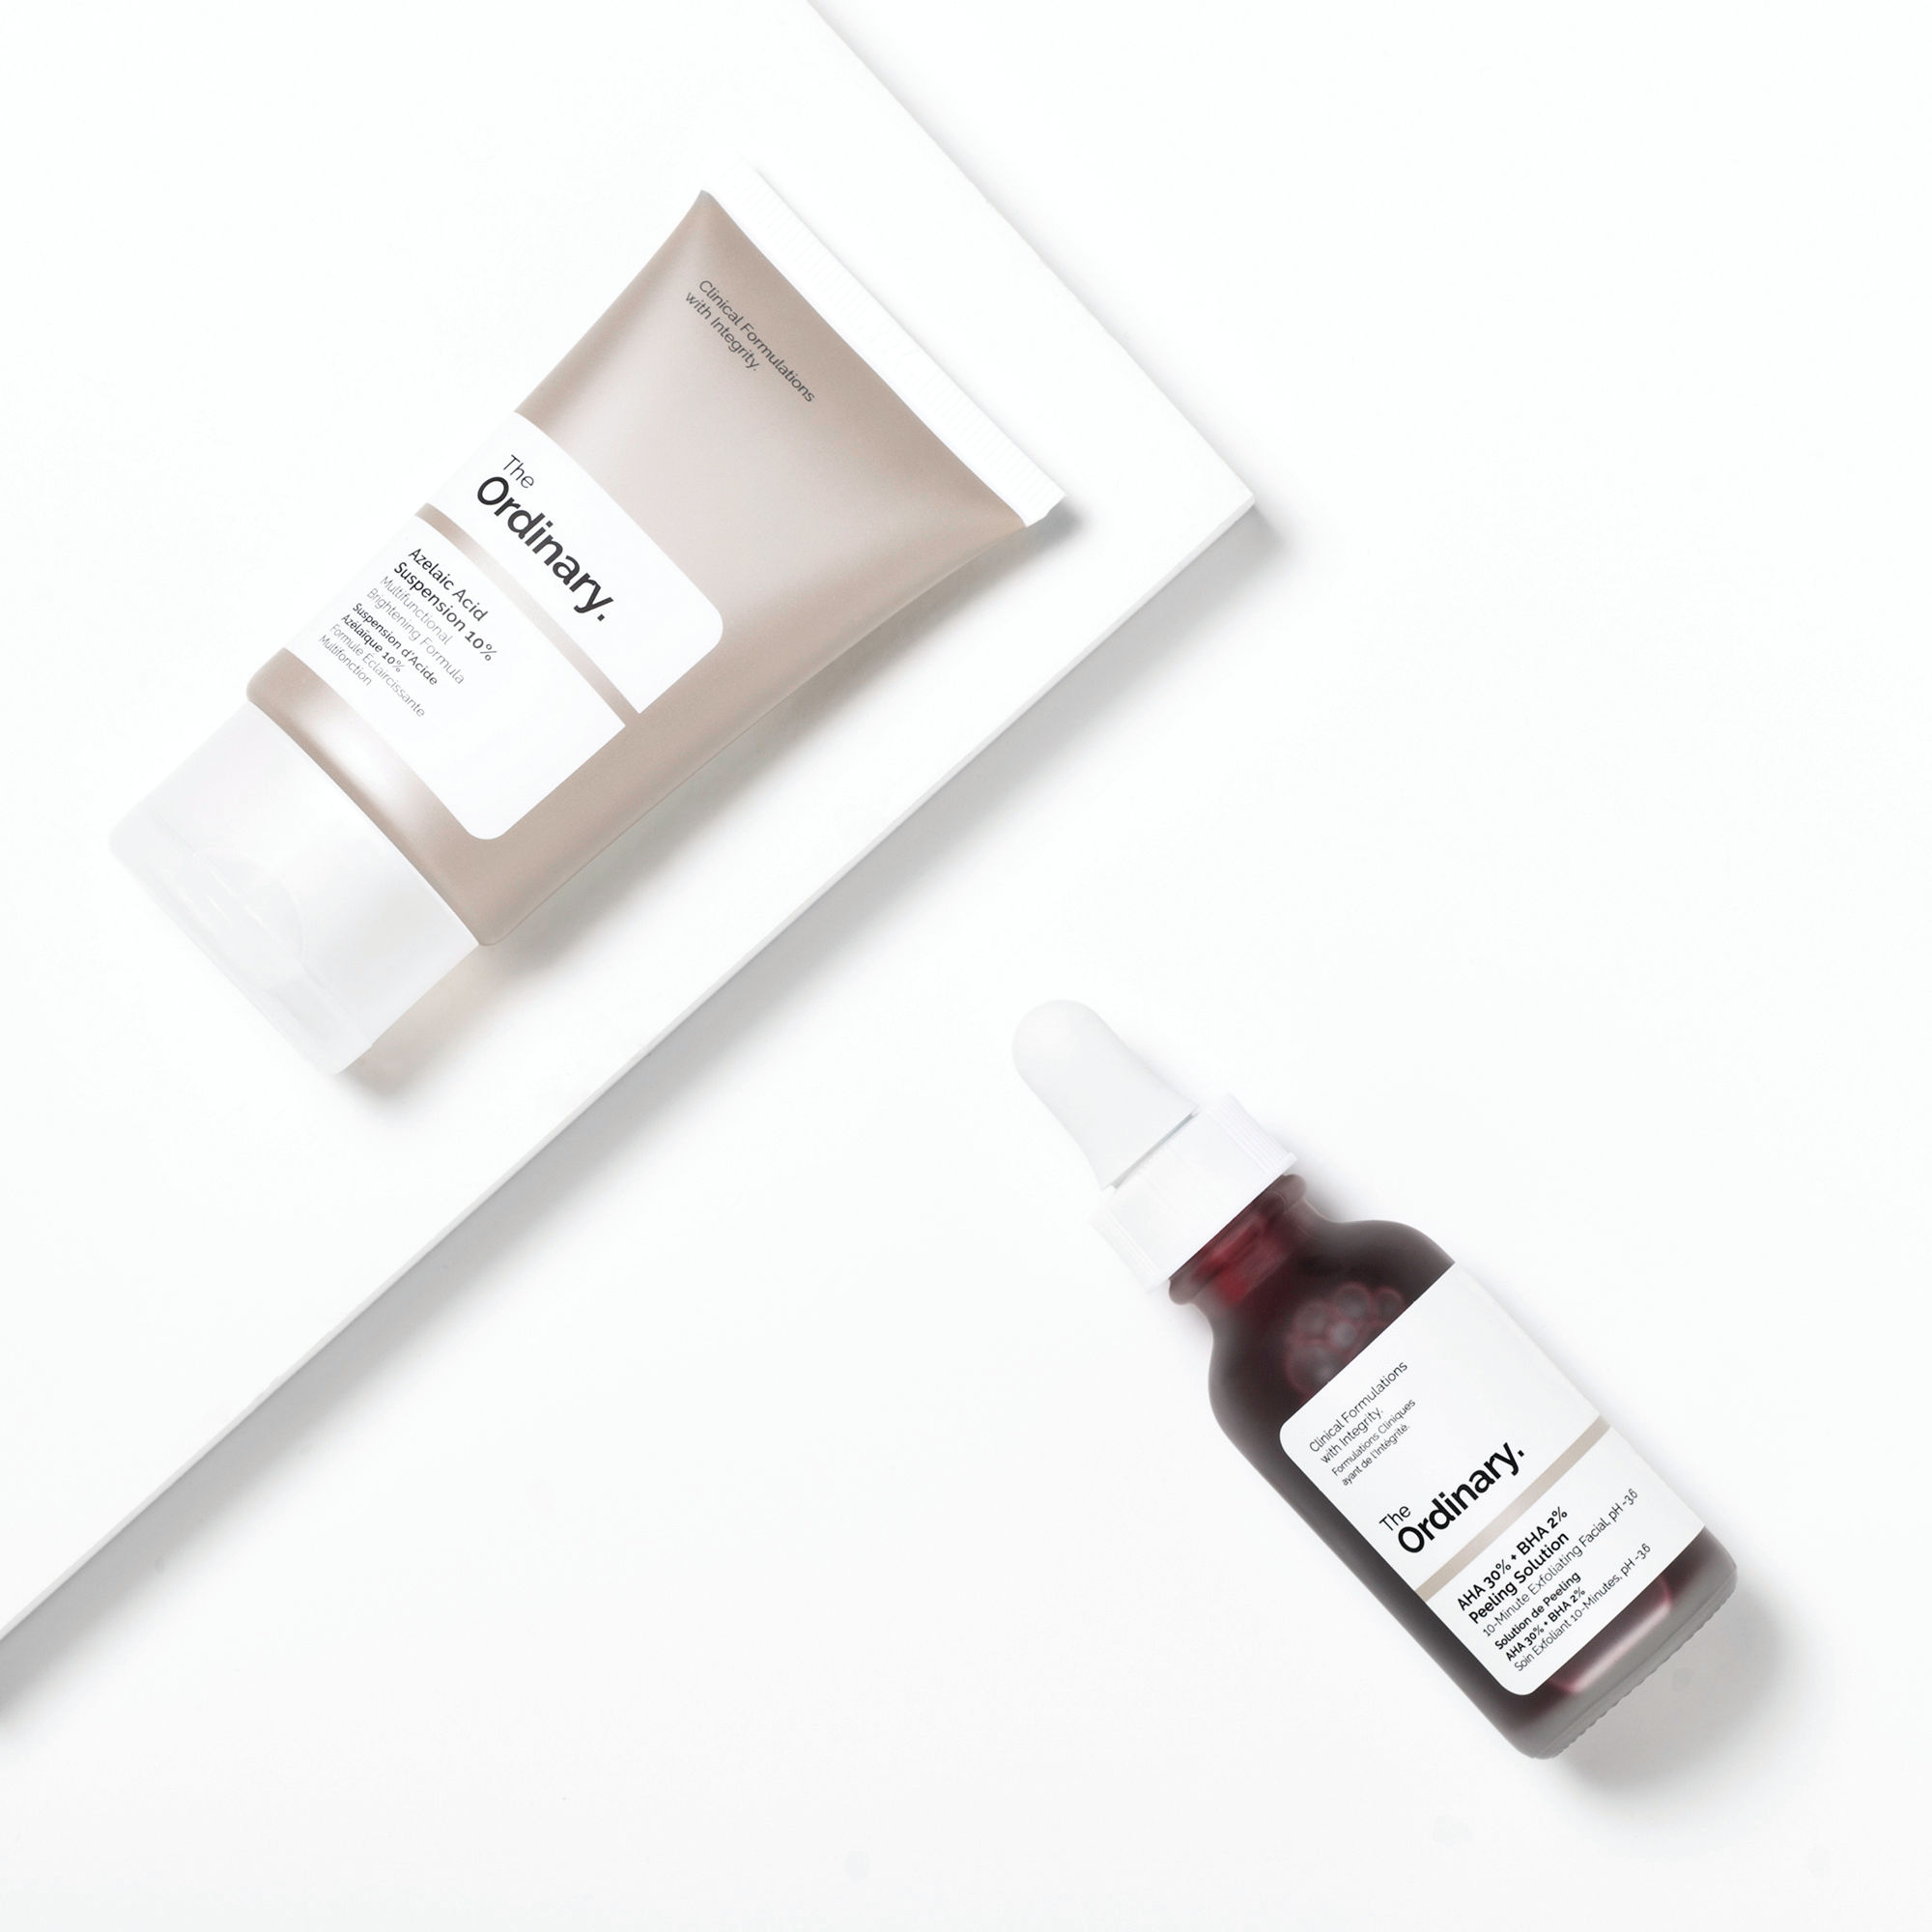 The Ordinary is now available in India